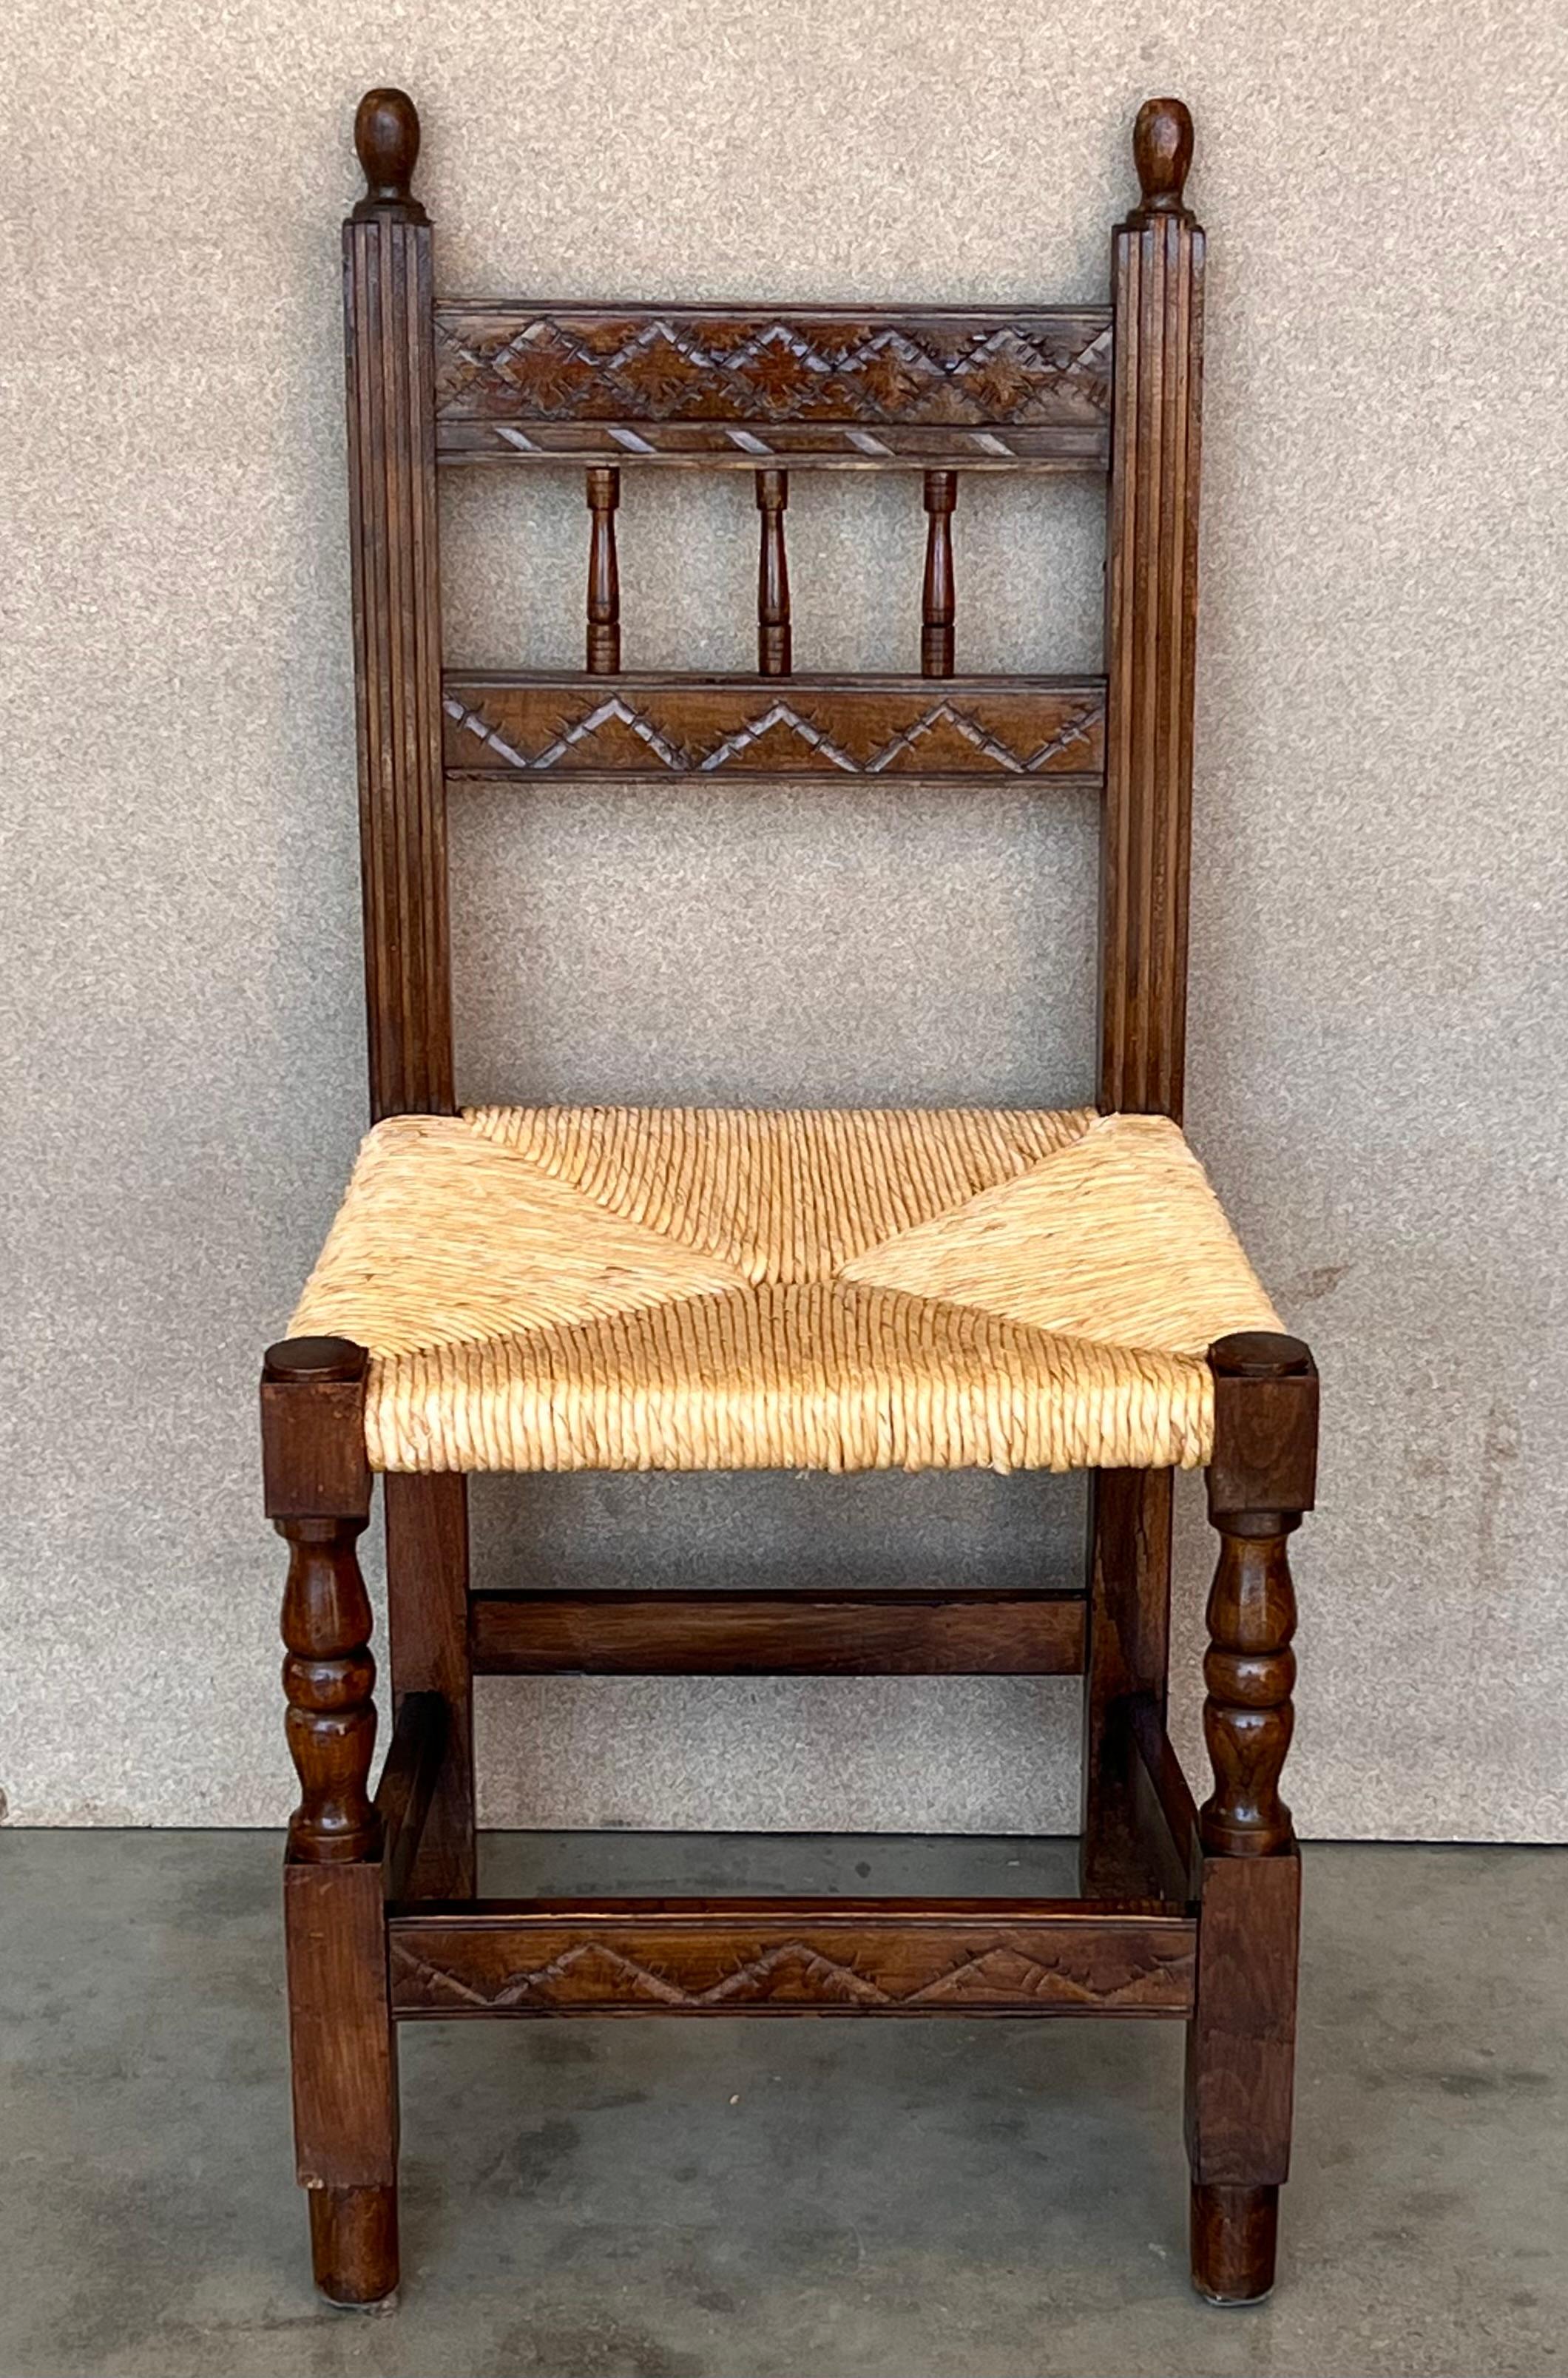 A set of 6 Spanish chairs with walnut structure with hand carved decoration. The seat are made of original cane. 
These chairs are true to the Spanish character and each features carvings that employ typical Spanish elements.

